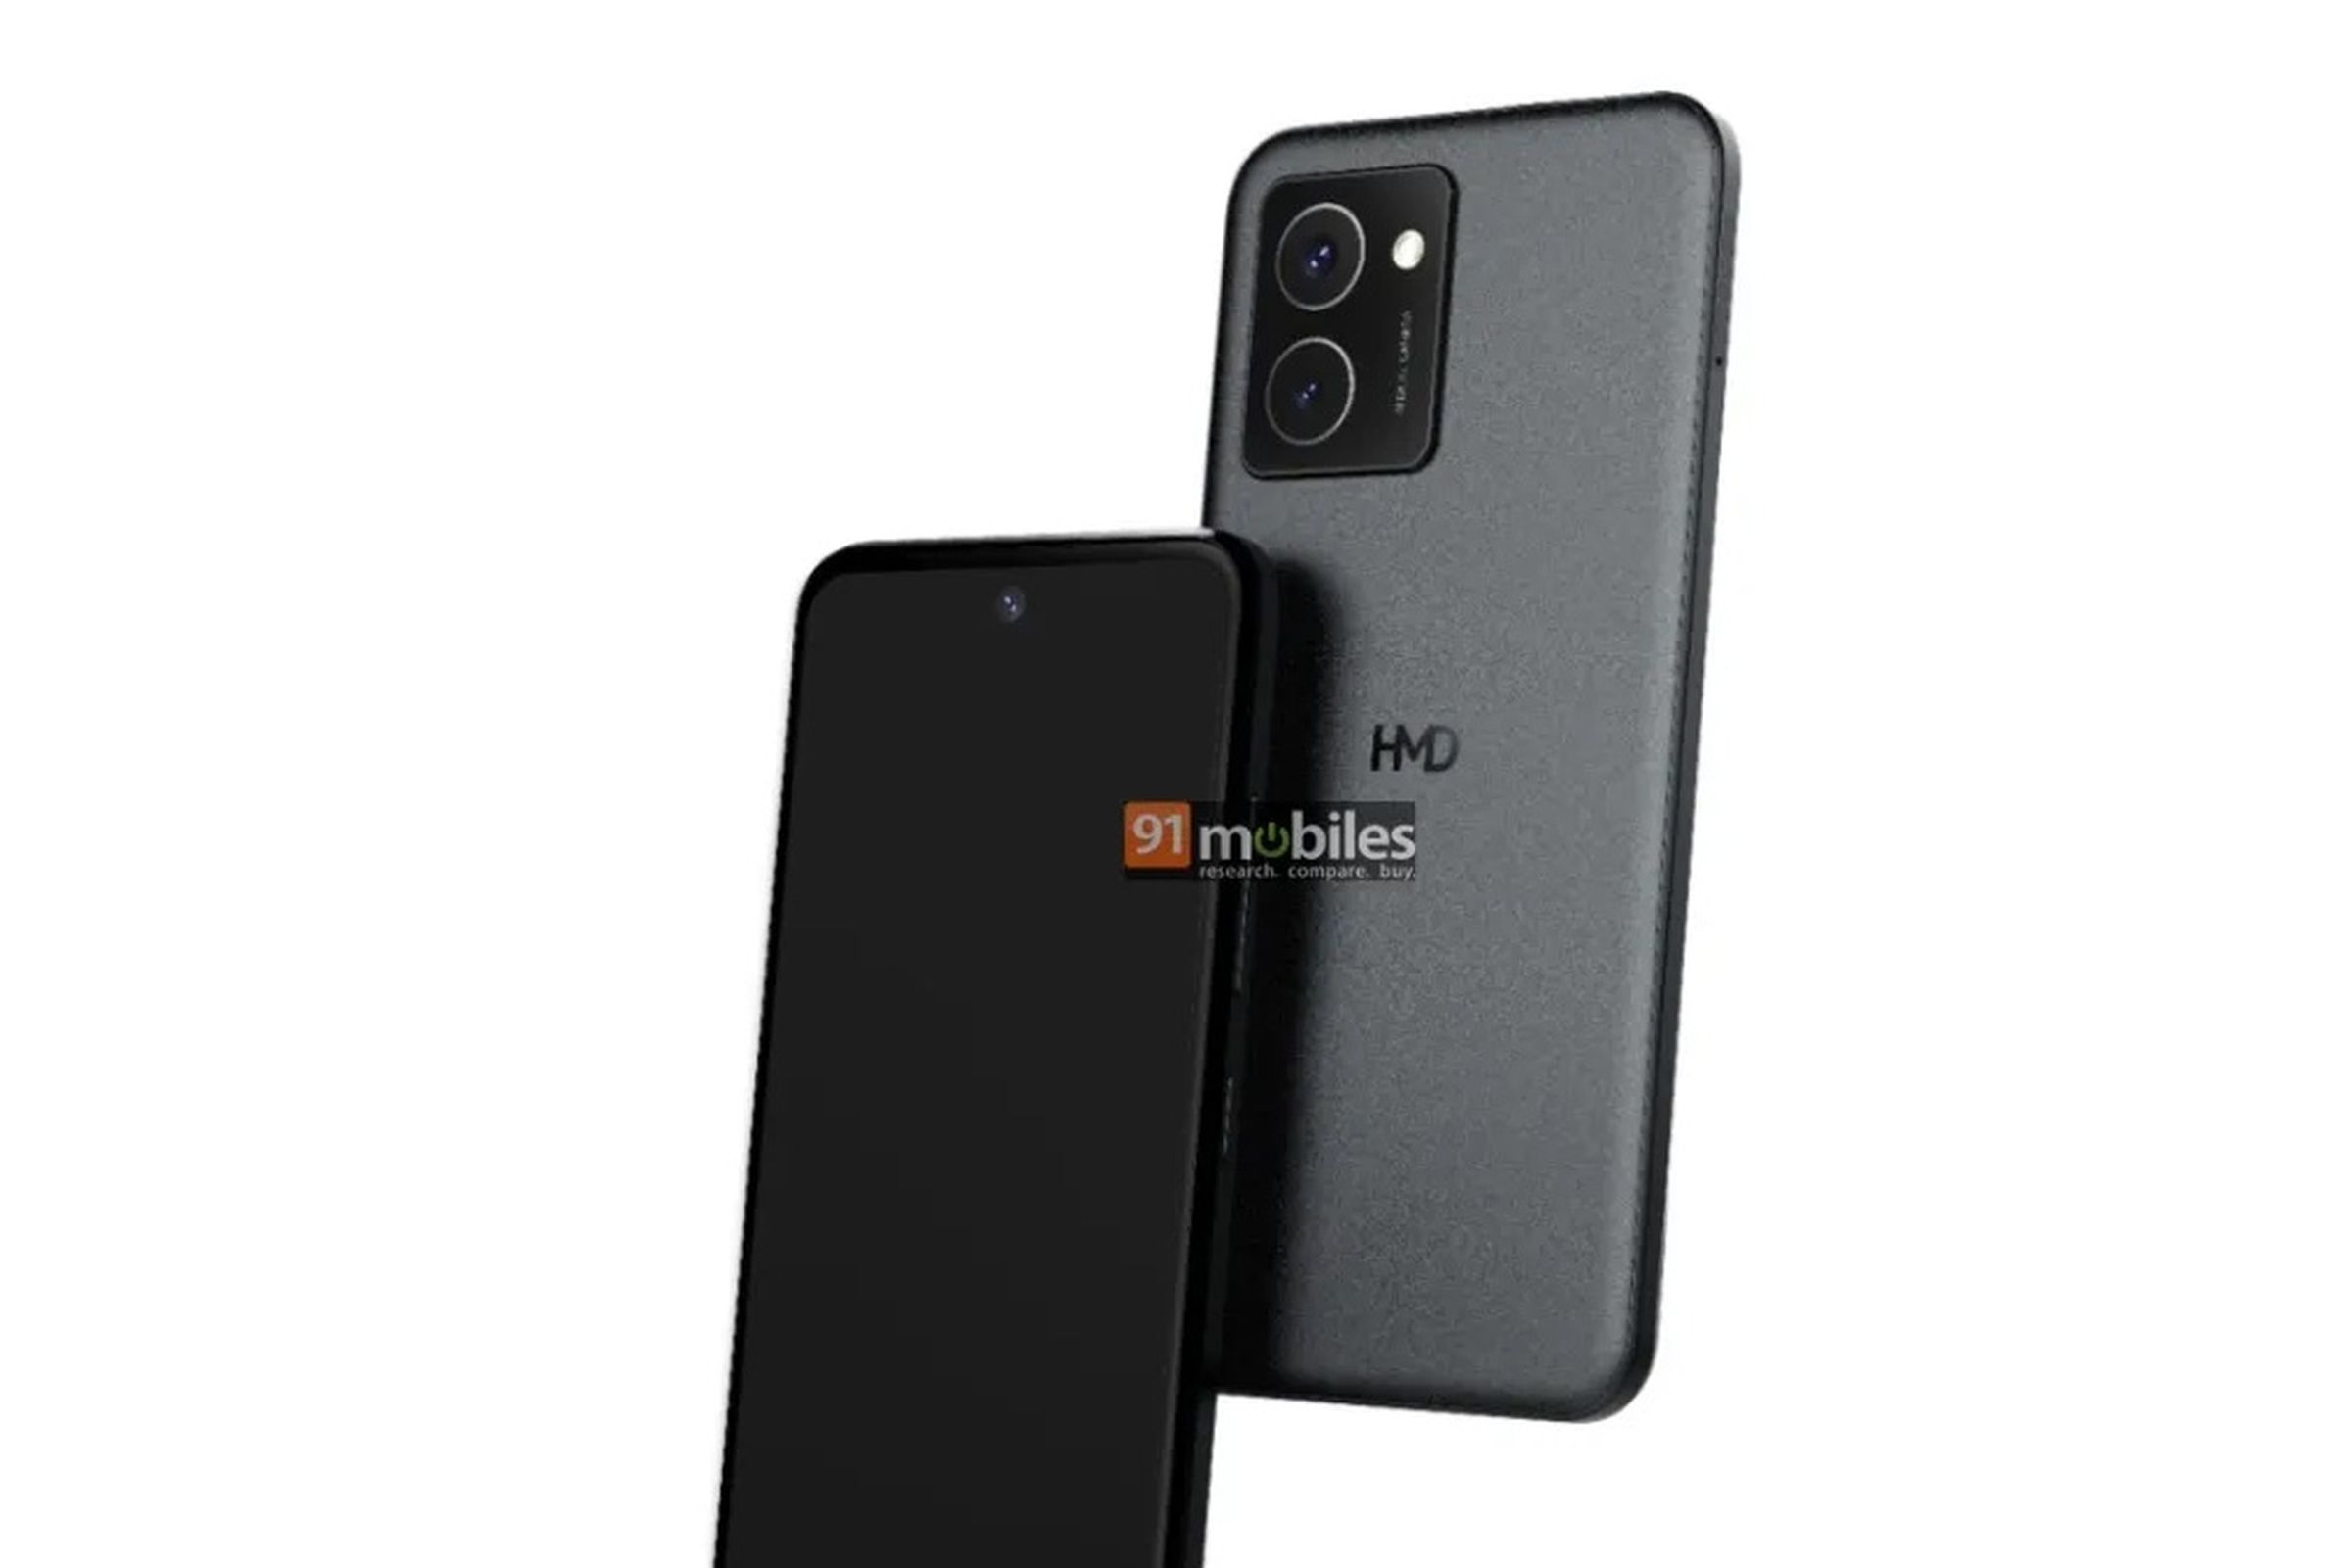 An unnamed HMD phone from the front and back.